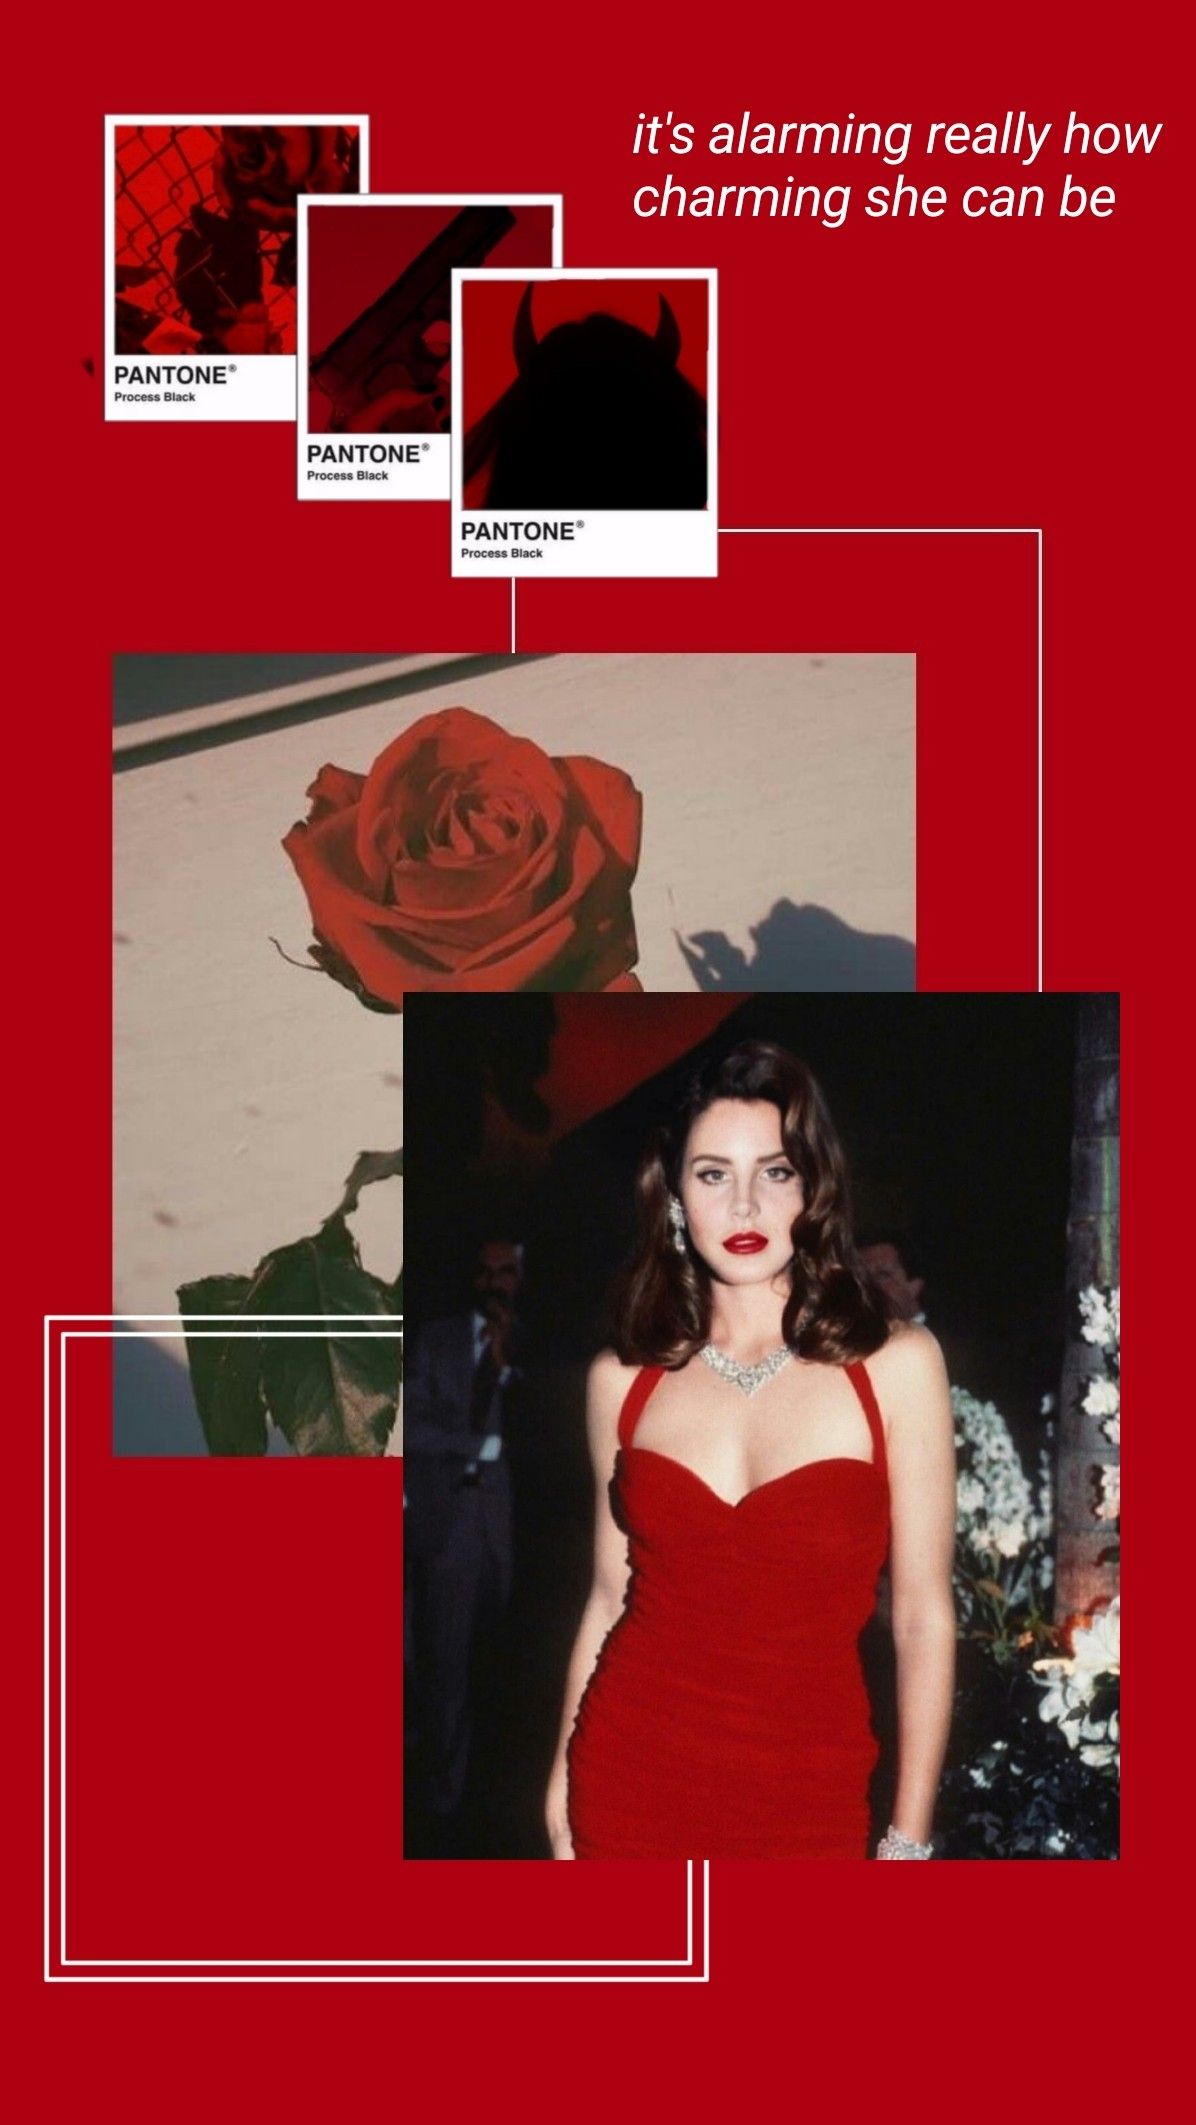 Red aesthetic wallpaper with a collage of a woman in a red dress and a rose. - Lana Del Rey